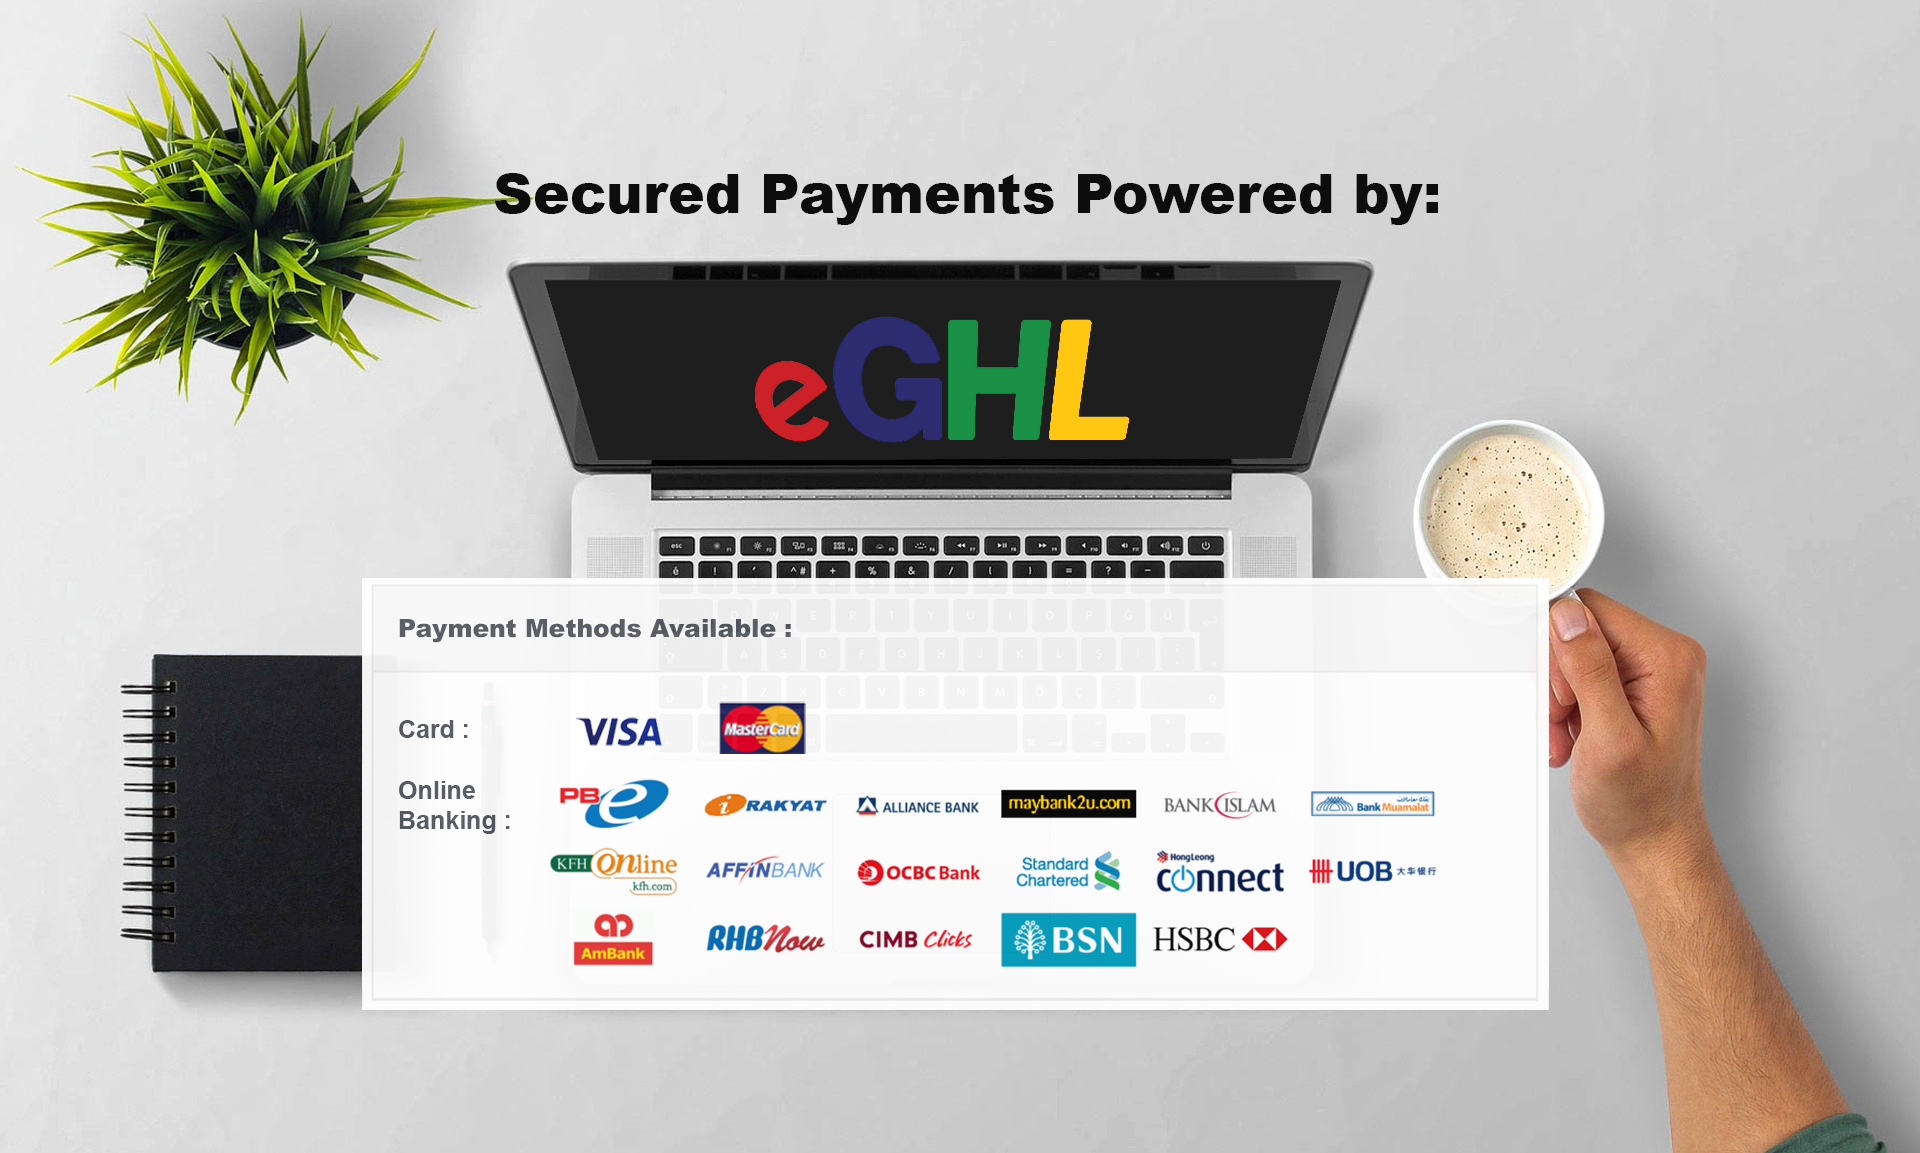 Secured Payments Powered By eGHL. We accept Visa, Master, Online Banking.